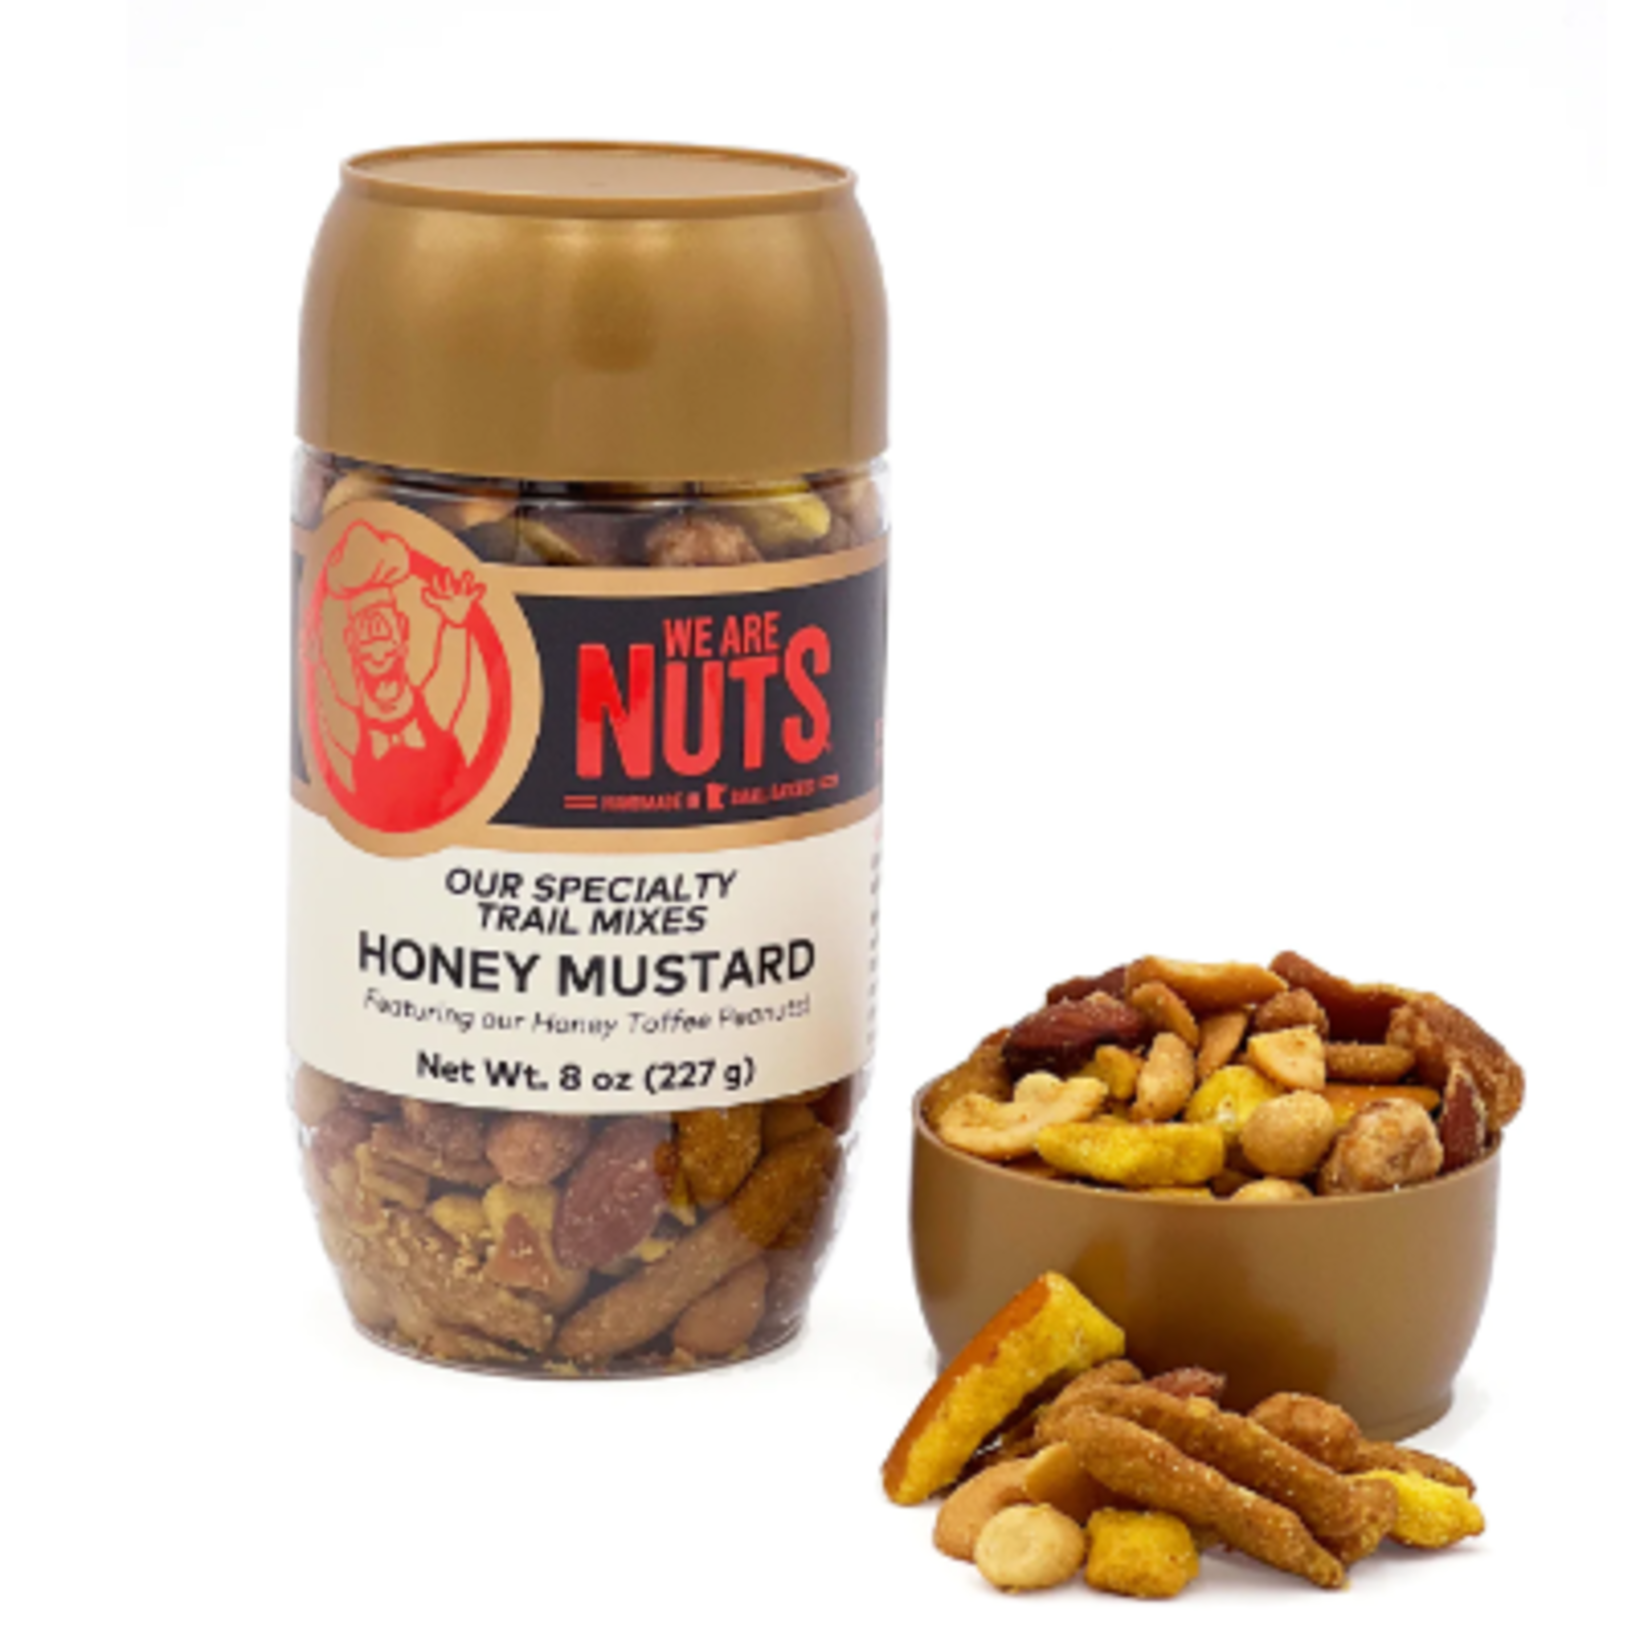 We Are Nuts We Are Nuts - Honey Mustard Trail Mix, 8 Oz